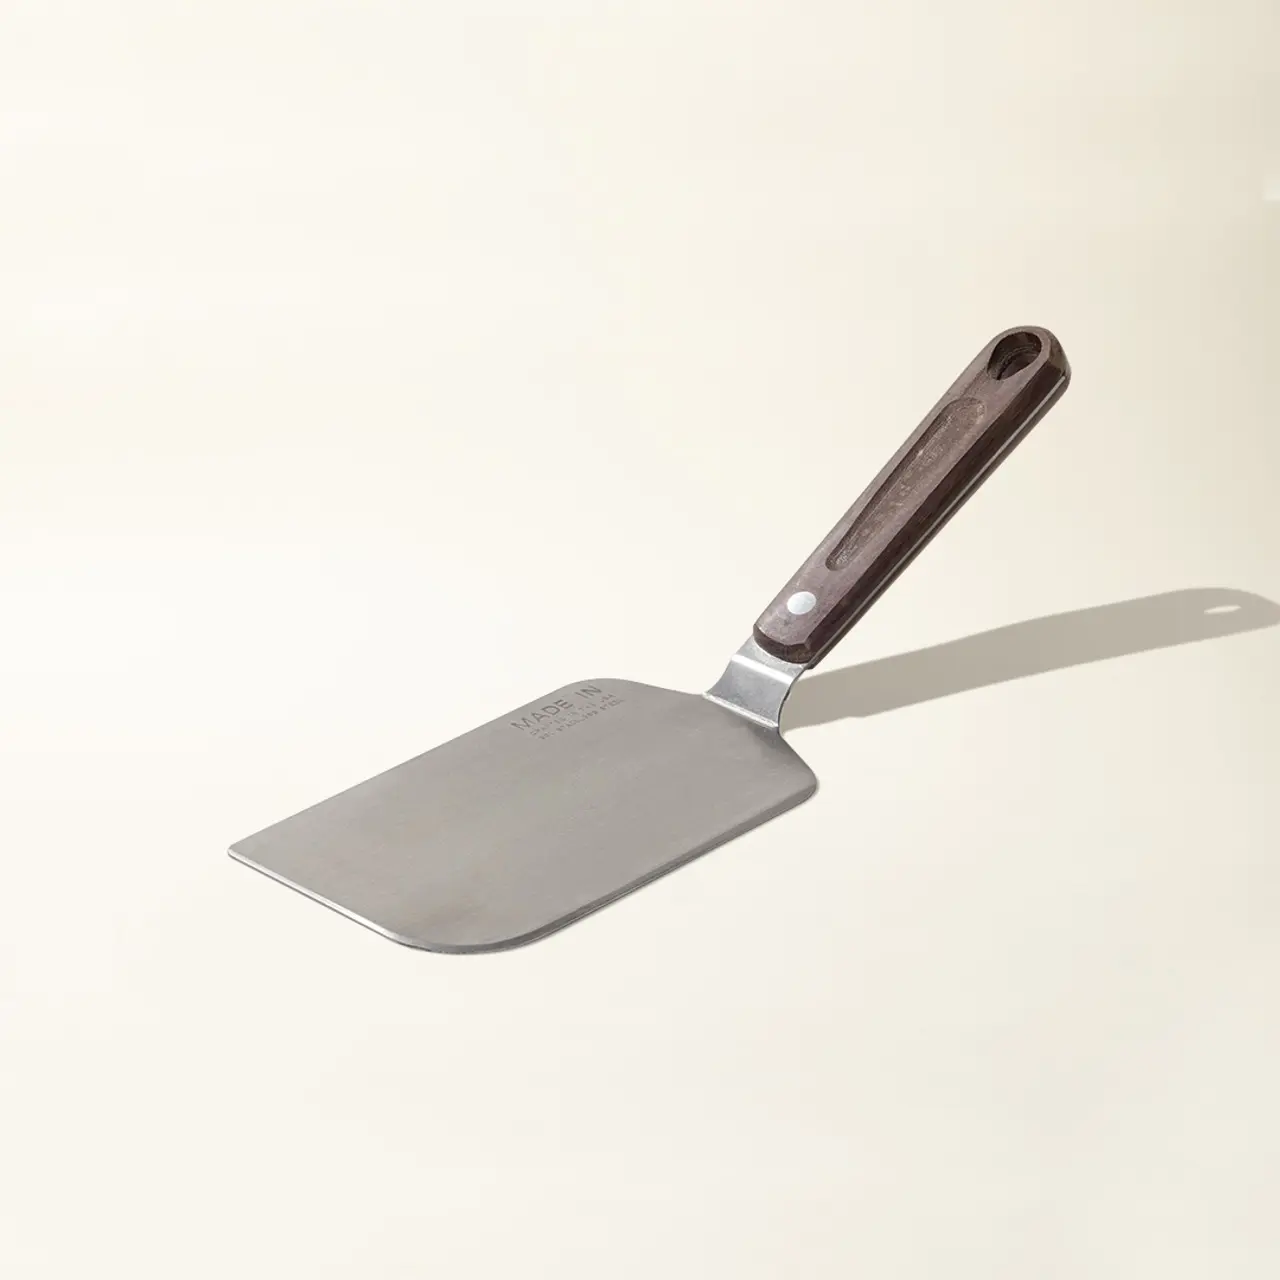 A stainless steel cheese knife with a riveted wooden handle is lying isolated on a pale background.